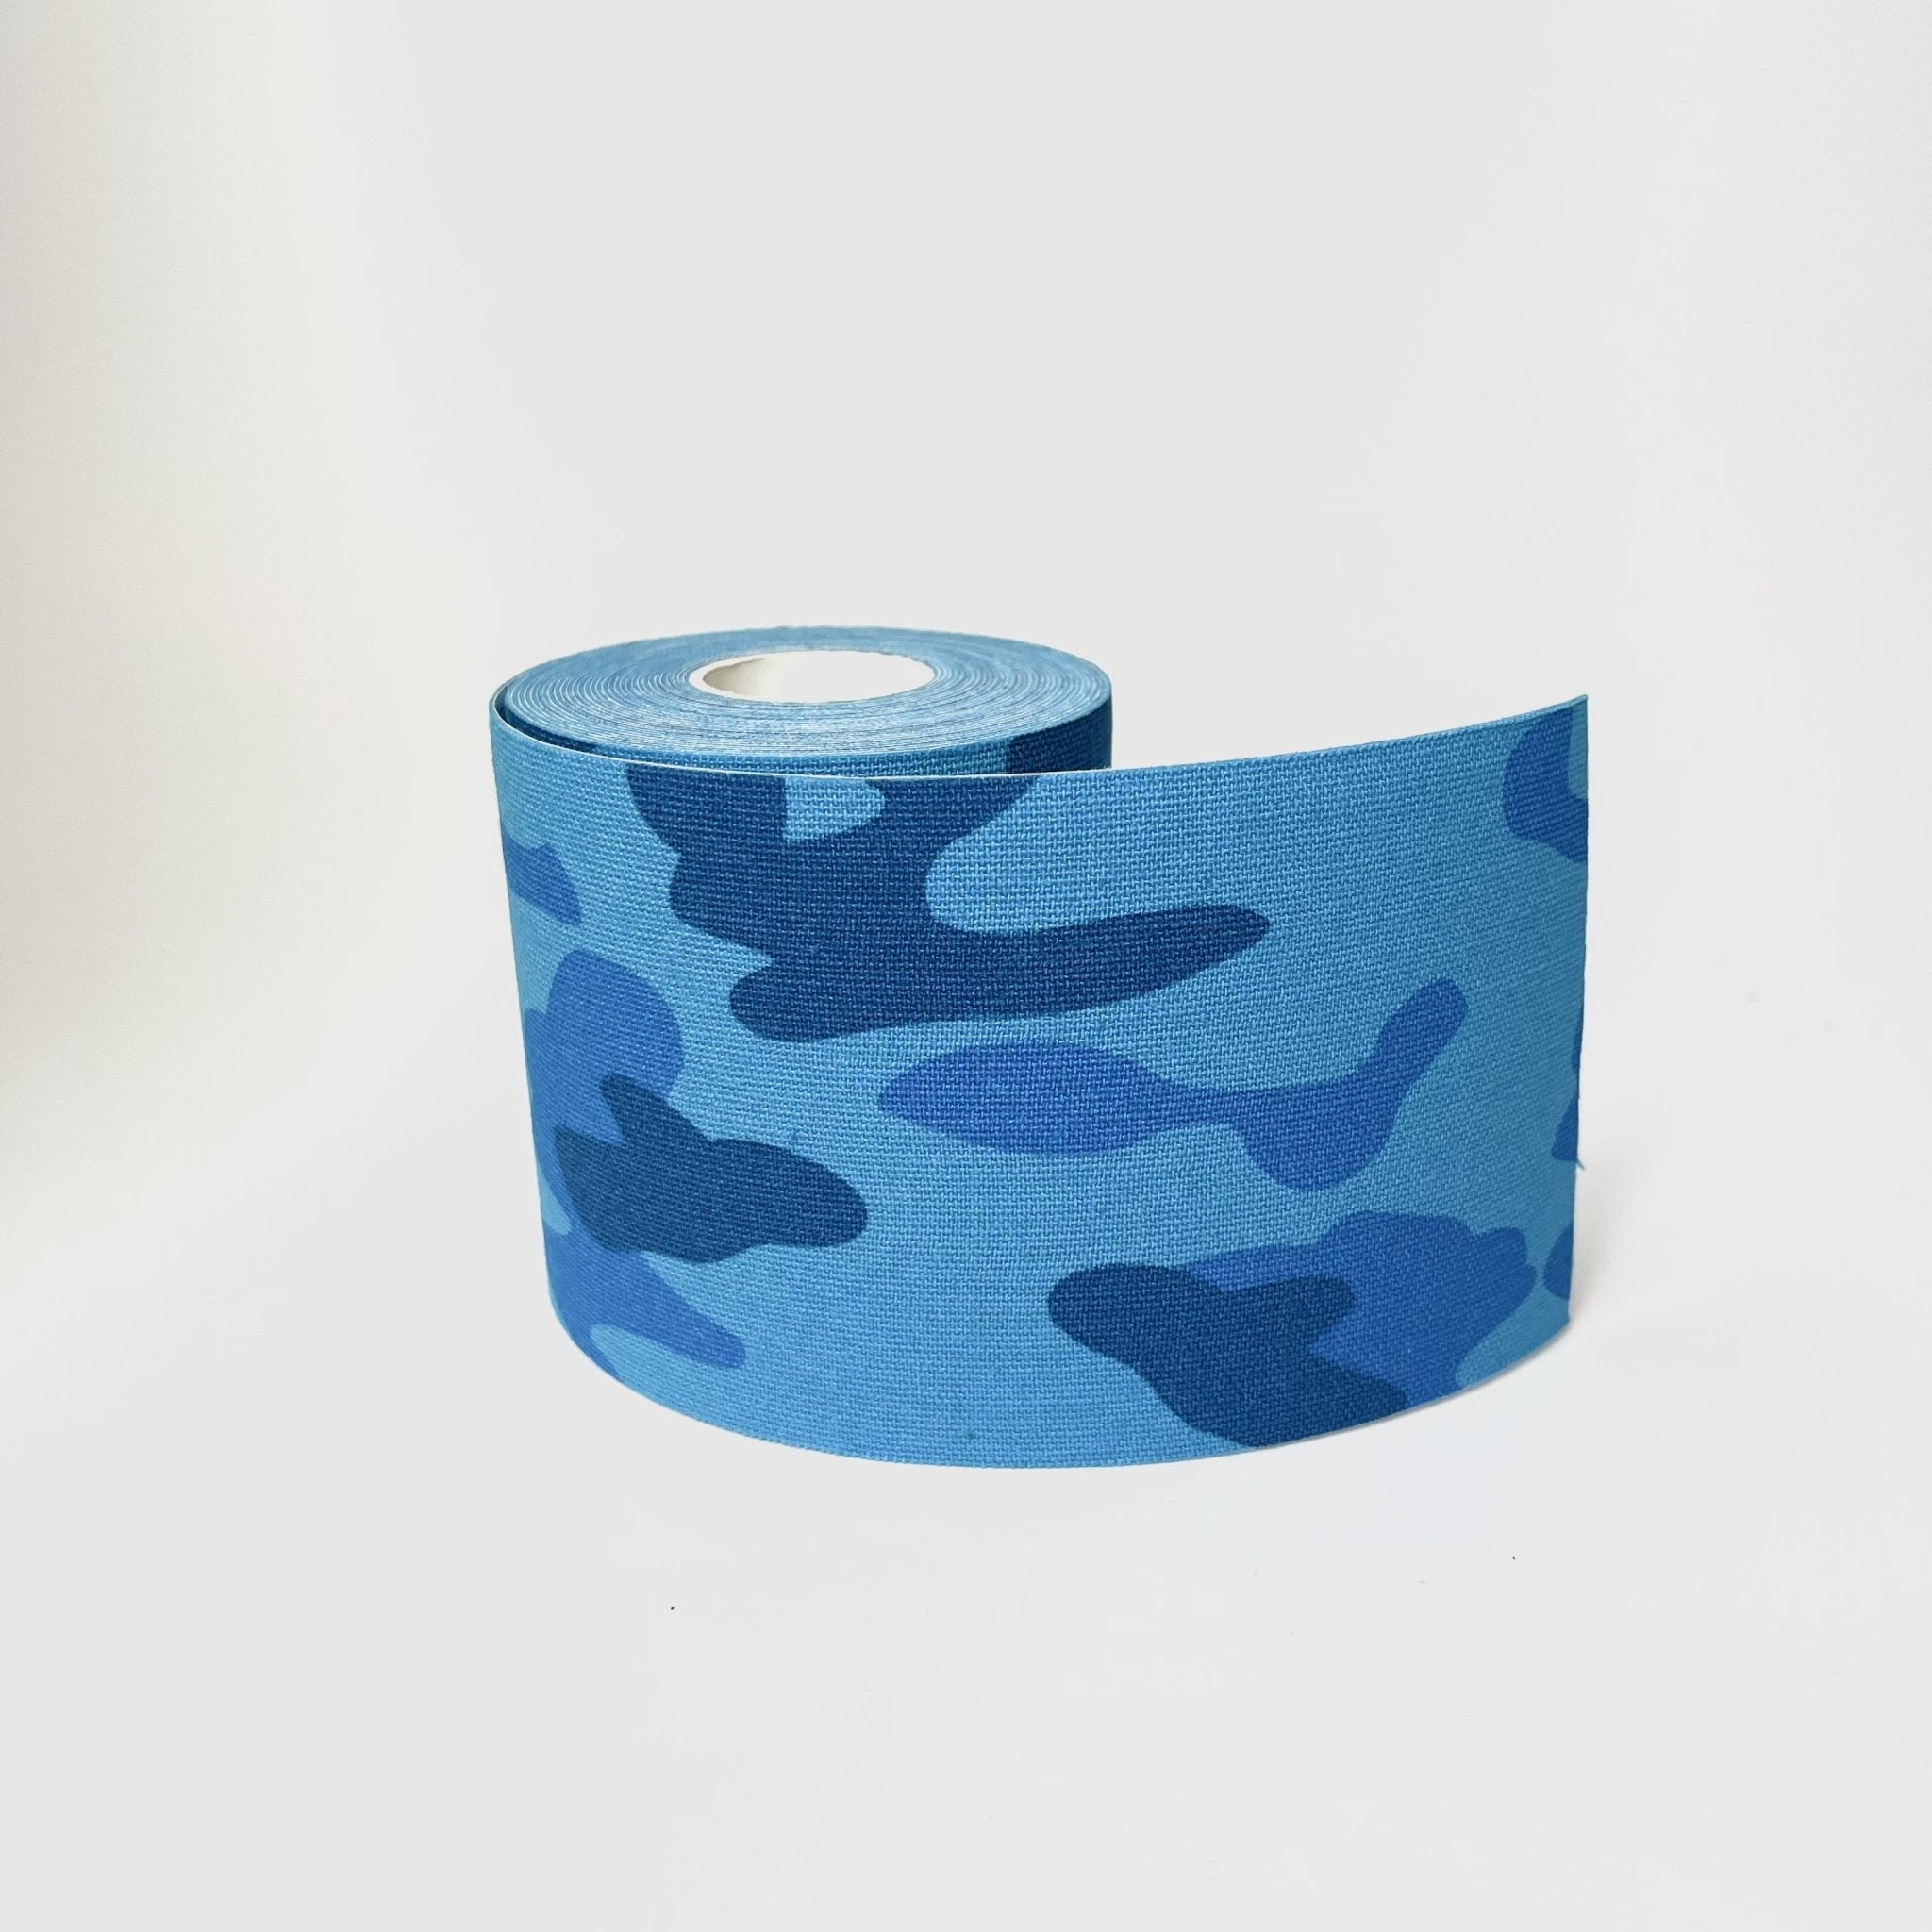  Kinesiology Goat Tape Athletic Tape. Blue Fabric with